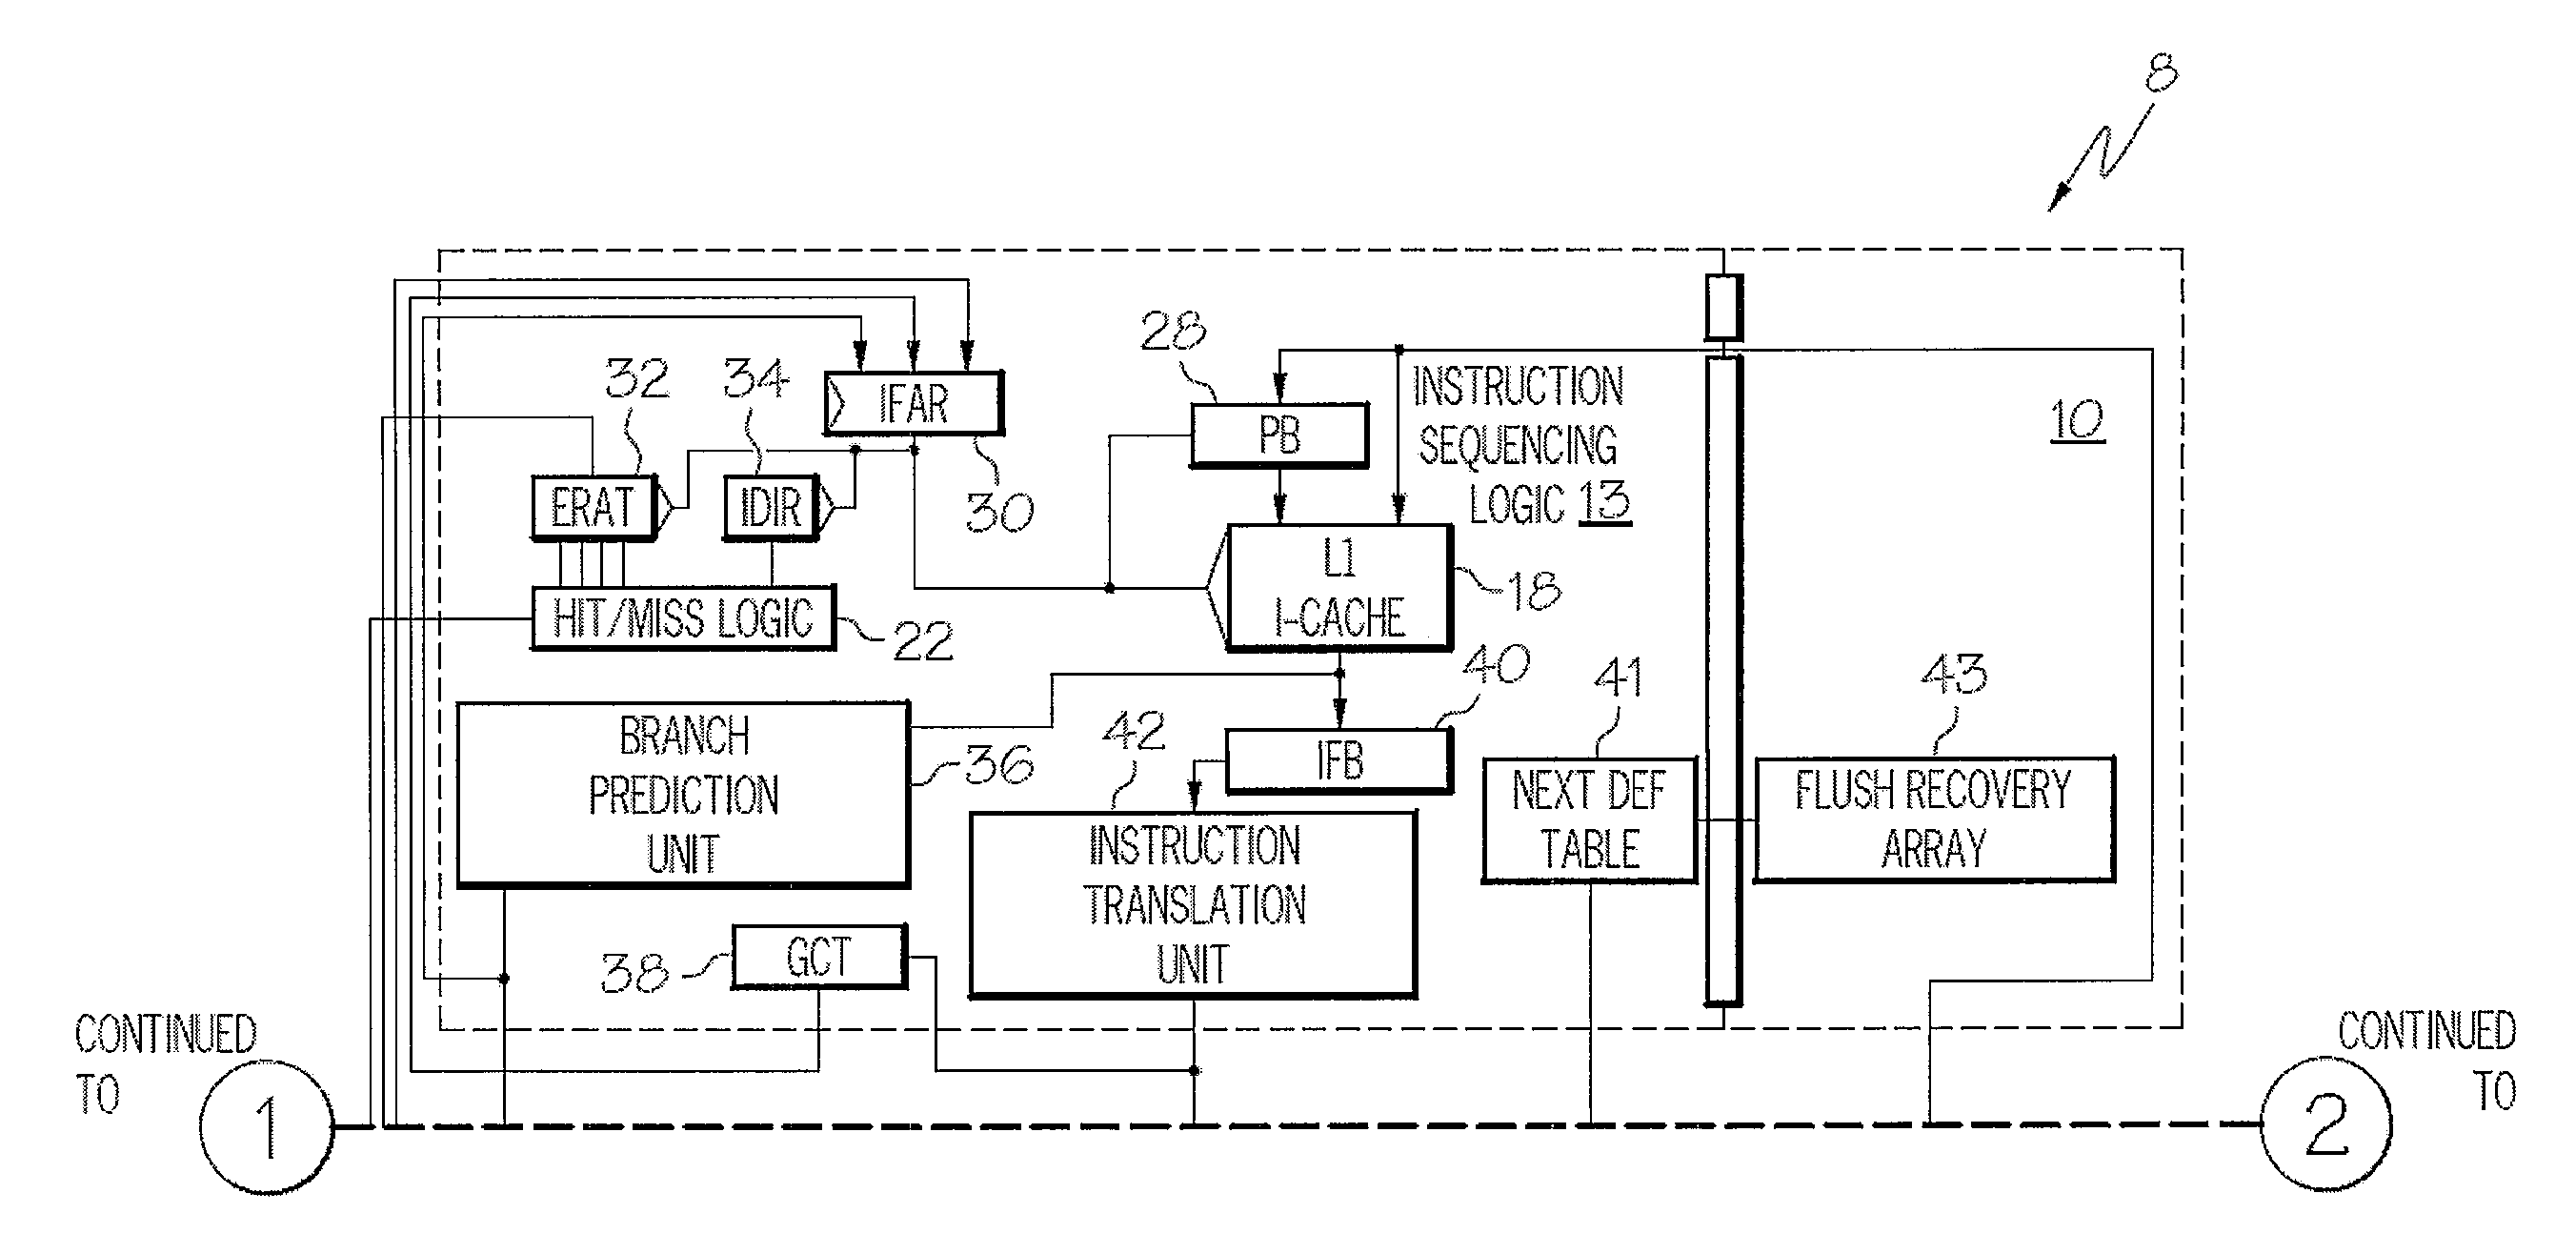 System and Method for Issuing Load-Dependent Instructions in an Issue Queue in a Processing Unit of a Data Processing System